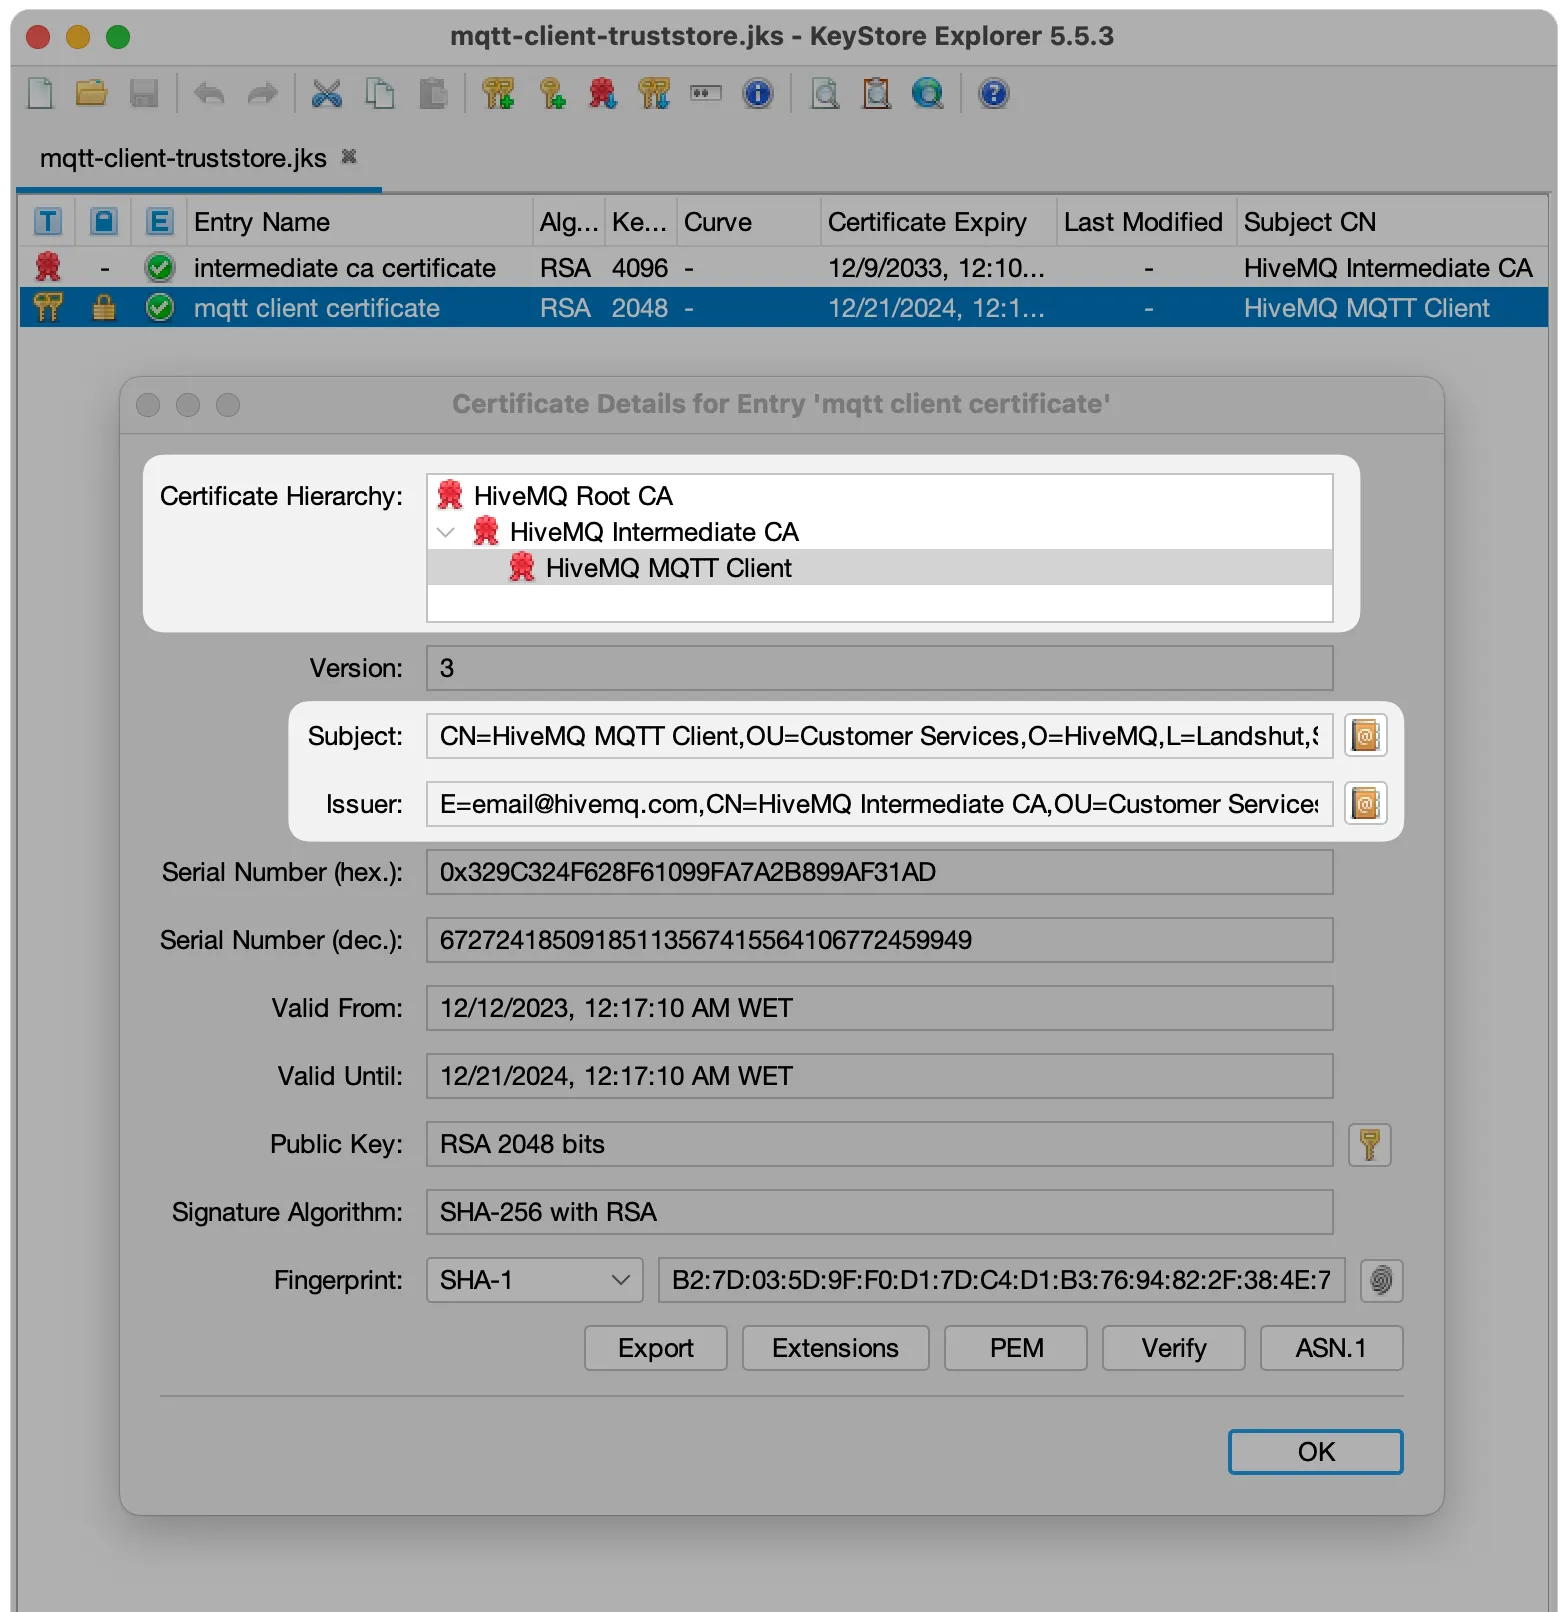 isualizing certificate hierarchy in KeyStore Explorer and the SAN extension.